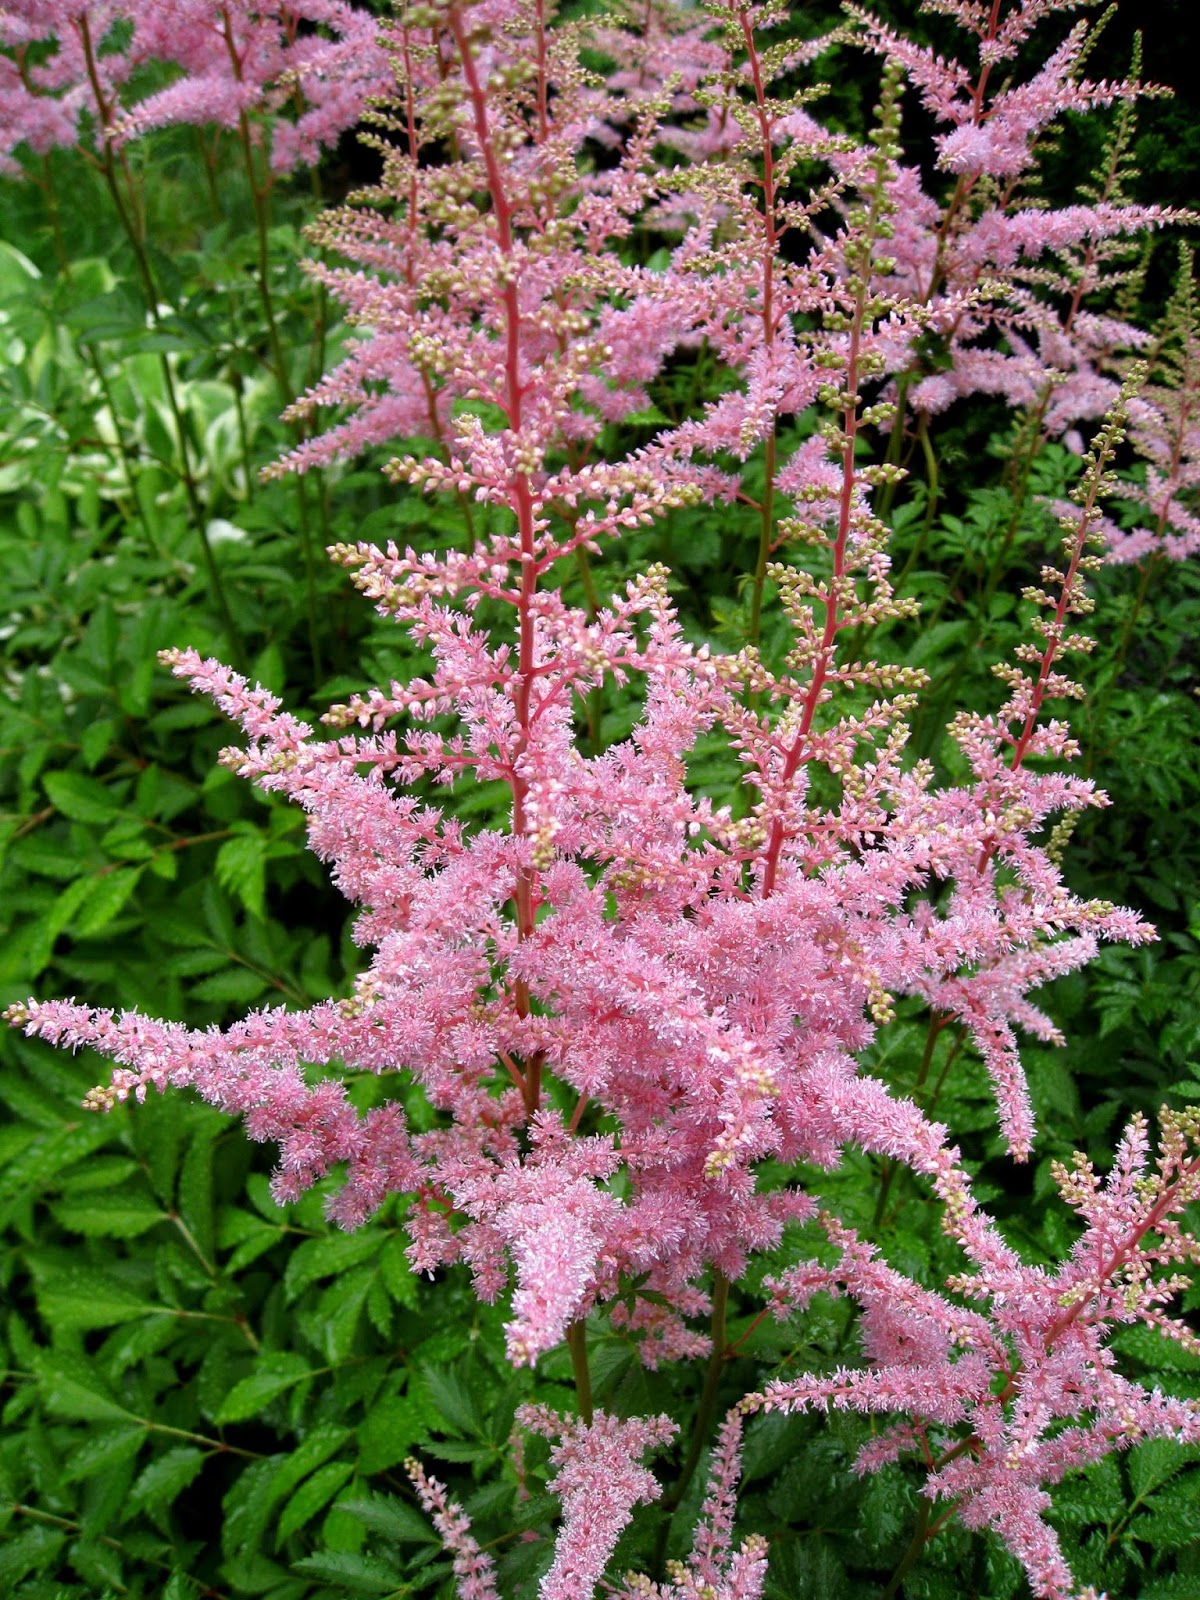 Image Astilbe_bunch_2.jpg free for use with attribution